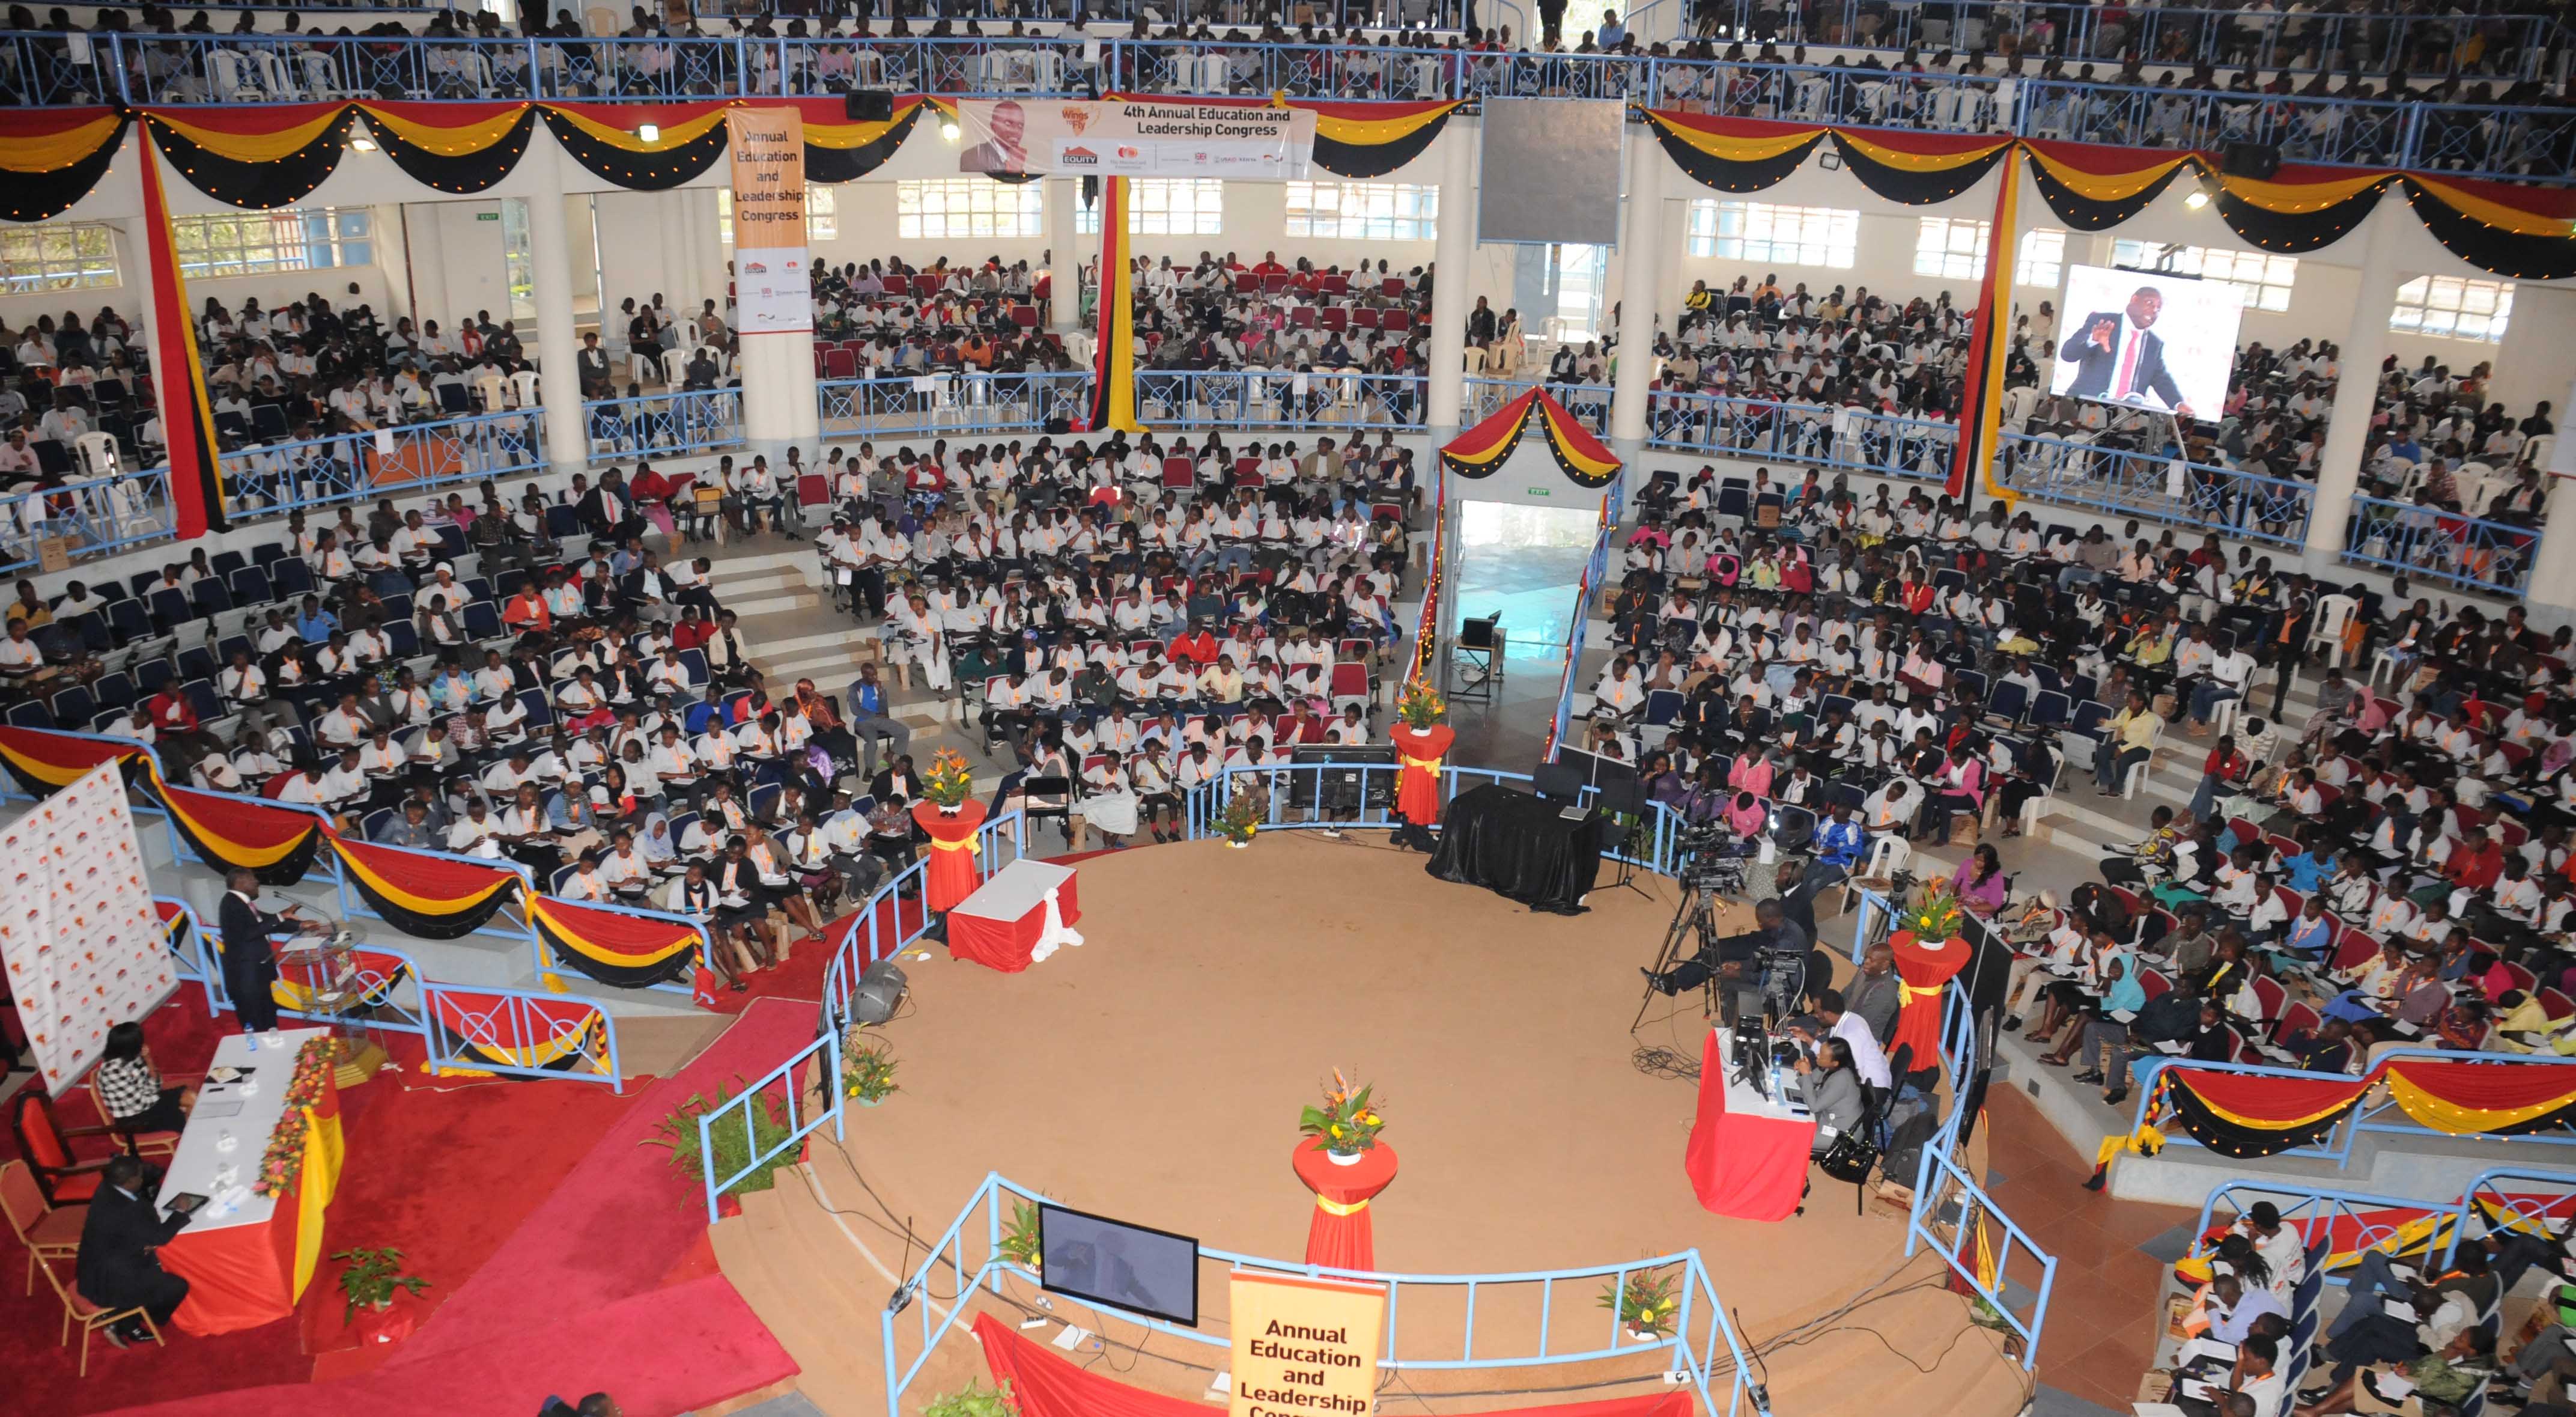 An audience at one of the Equity Foundation's event. 2,000 students will benefit this year. [Photo: mastercardfdn.org]